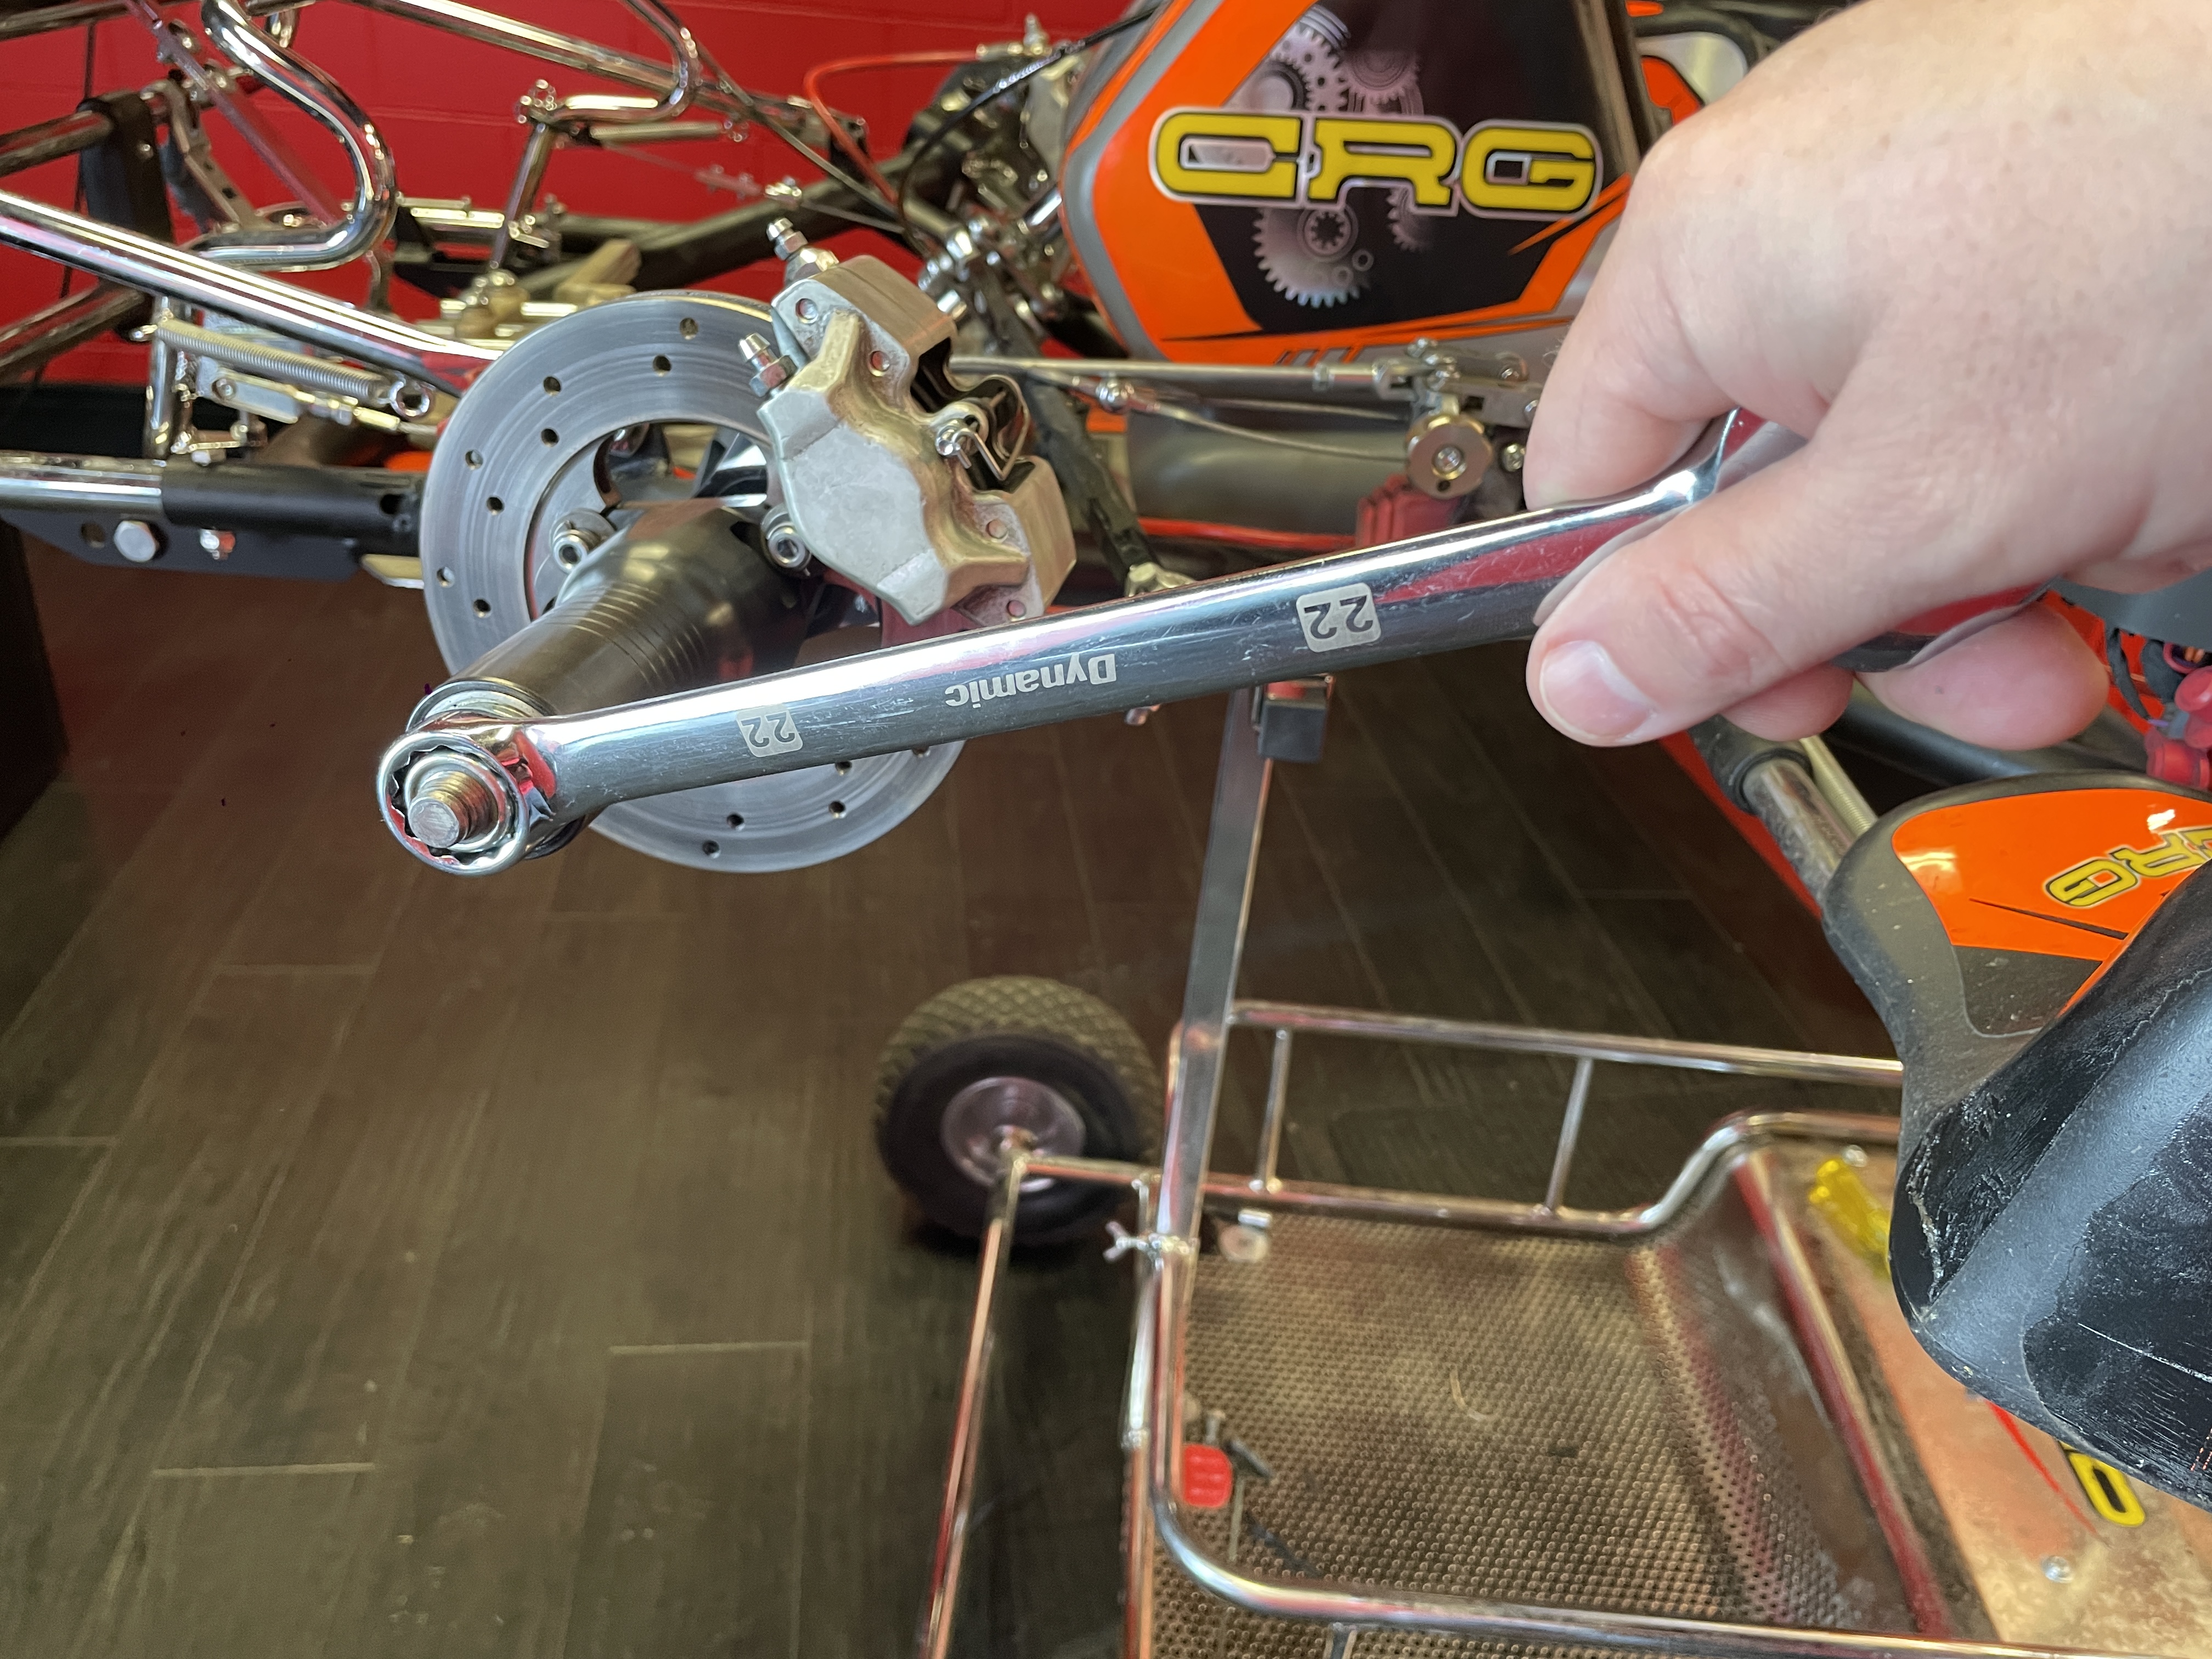 Torque Wrench Turning a Nut on a CRG Go Kart?